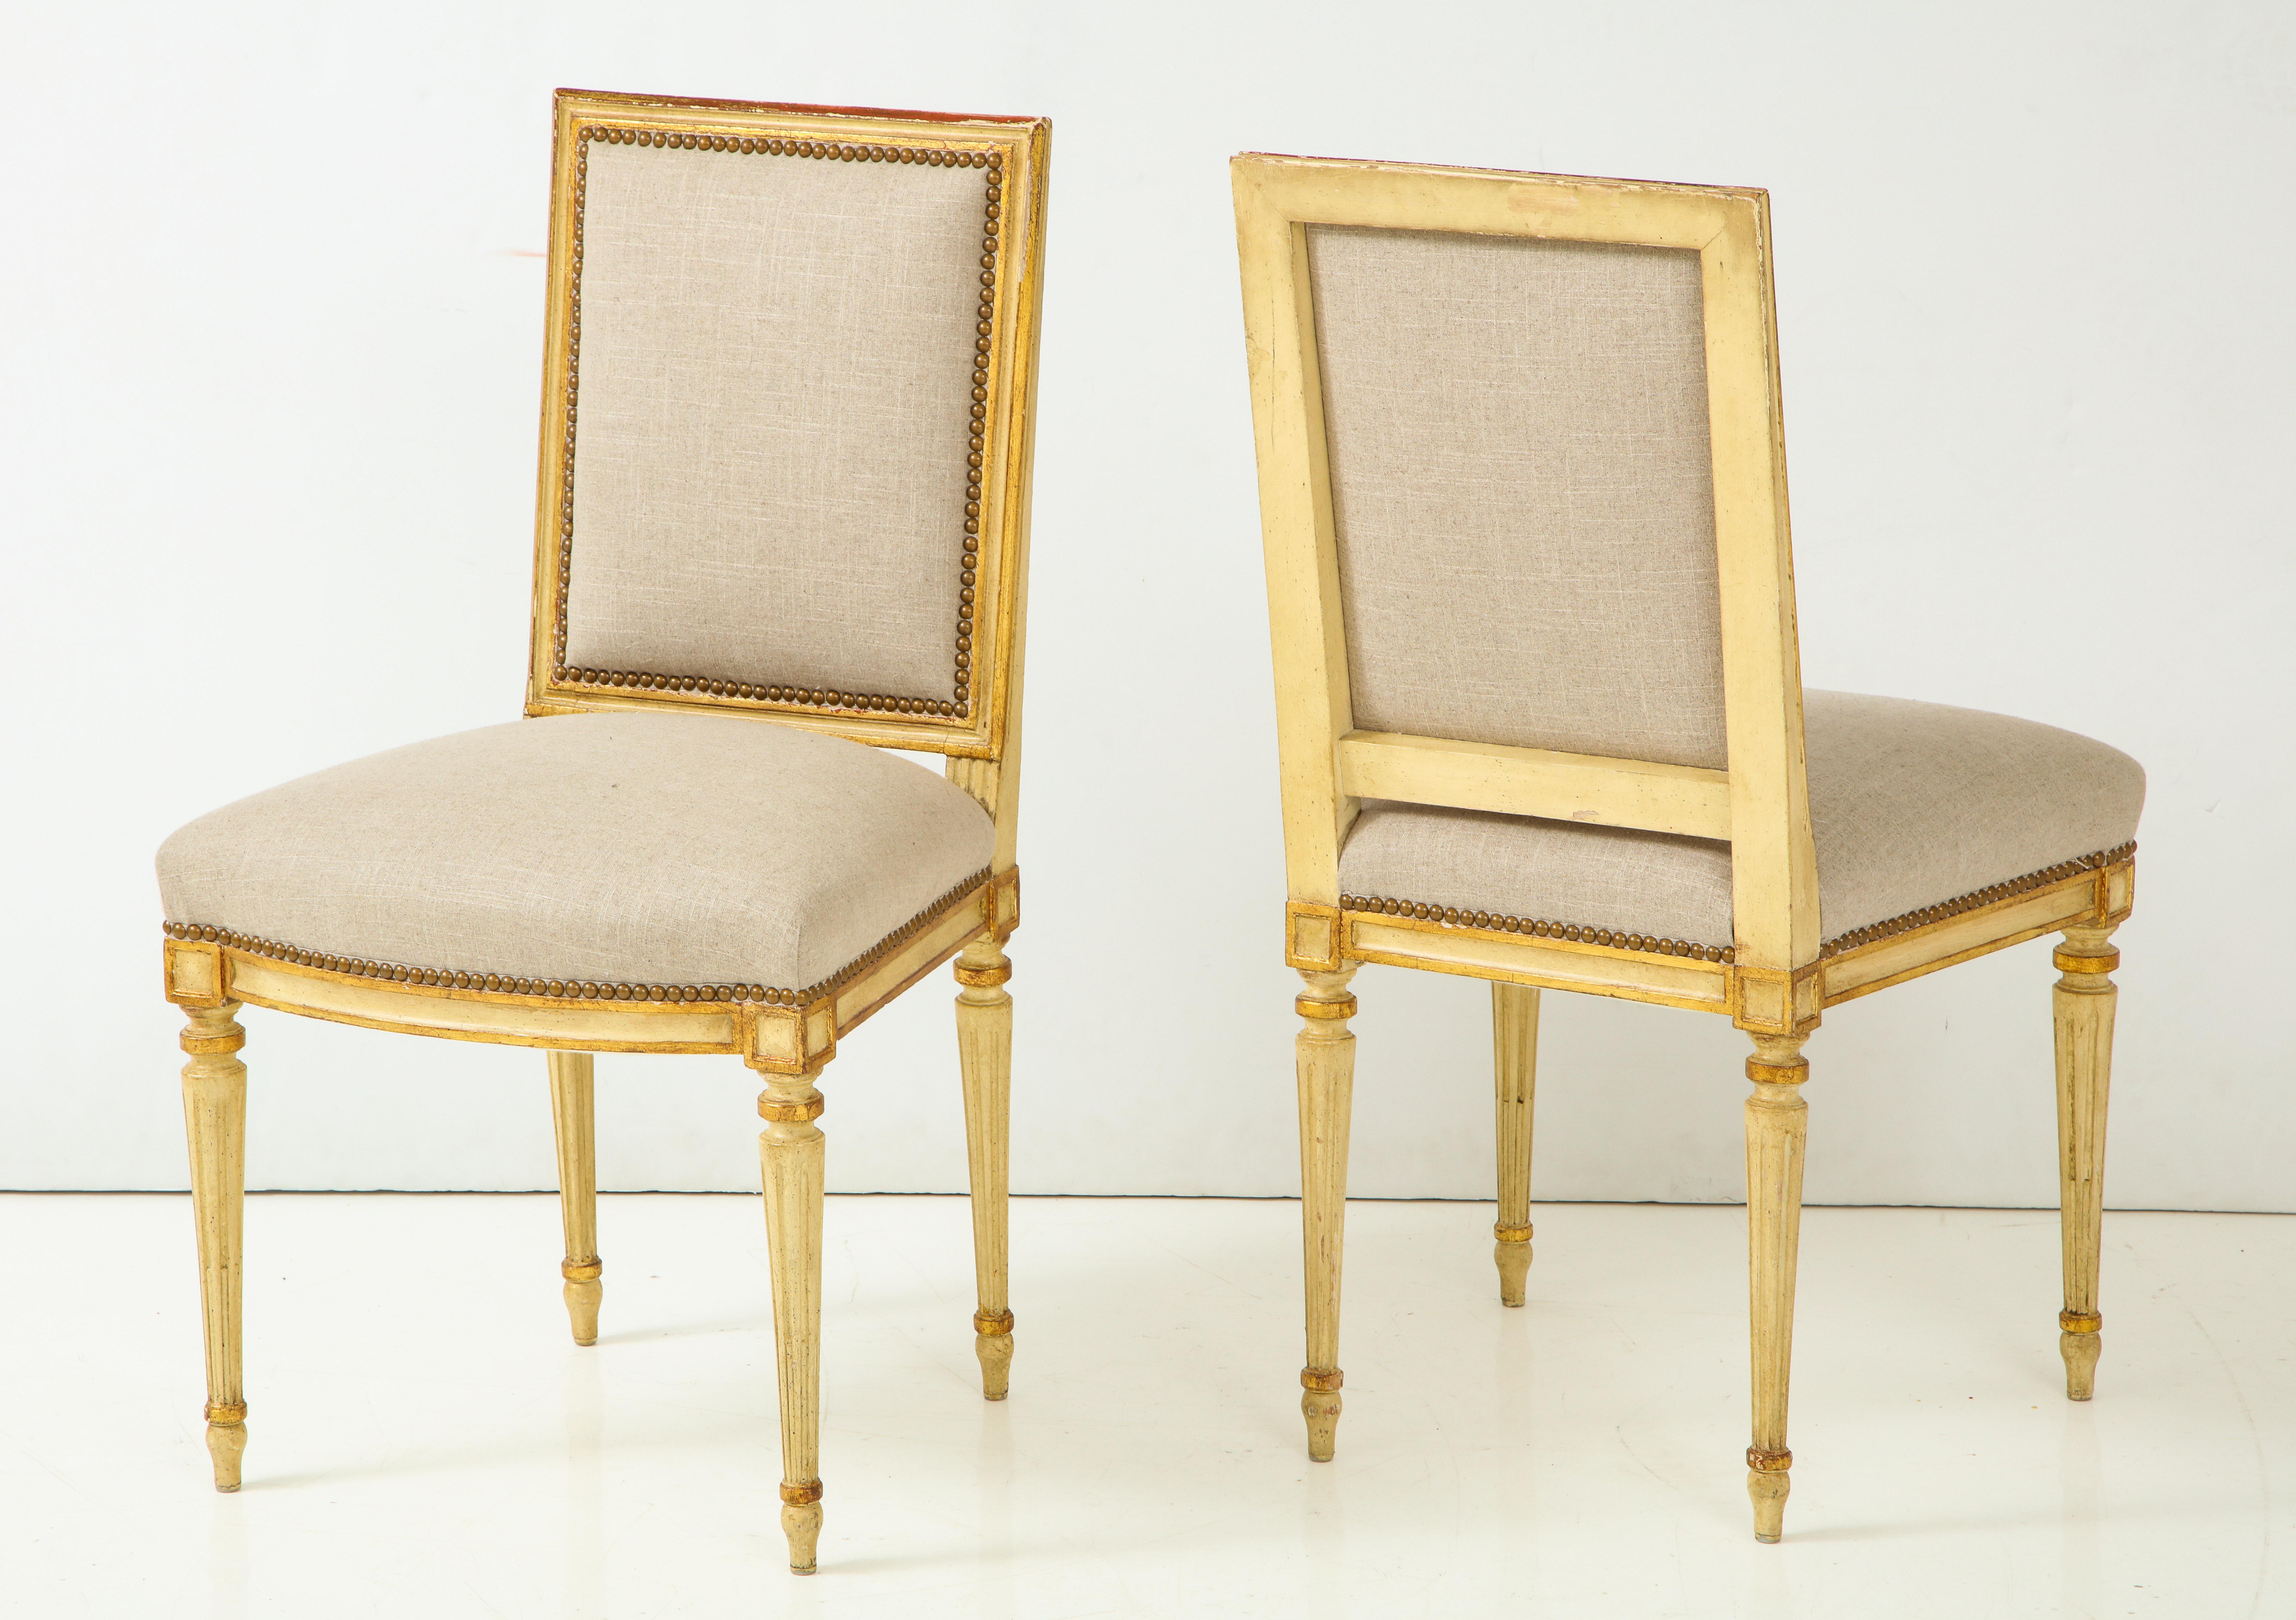 An exceptional pair of side chairs in the Louis XVI style. The chairs feature the reeded, tapered legs characteristic of this style. The painted finish is accented in gold leaf, making for a warm, rich patina. Perfect as pull-up chairs or on either